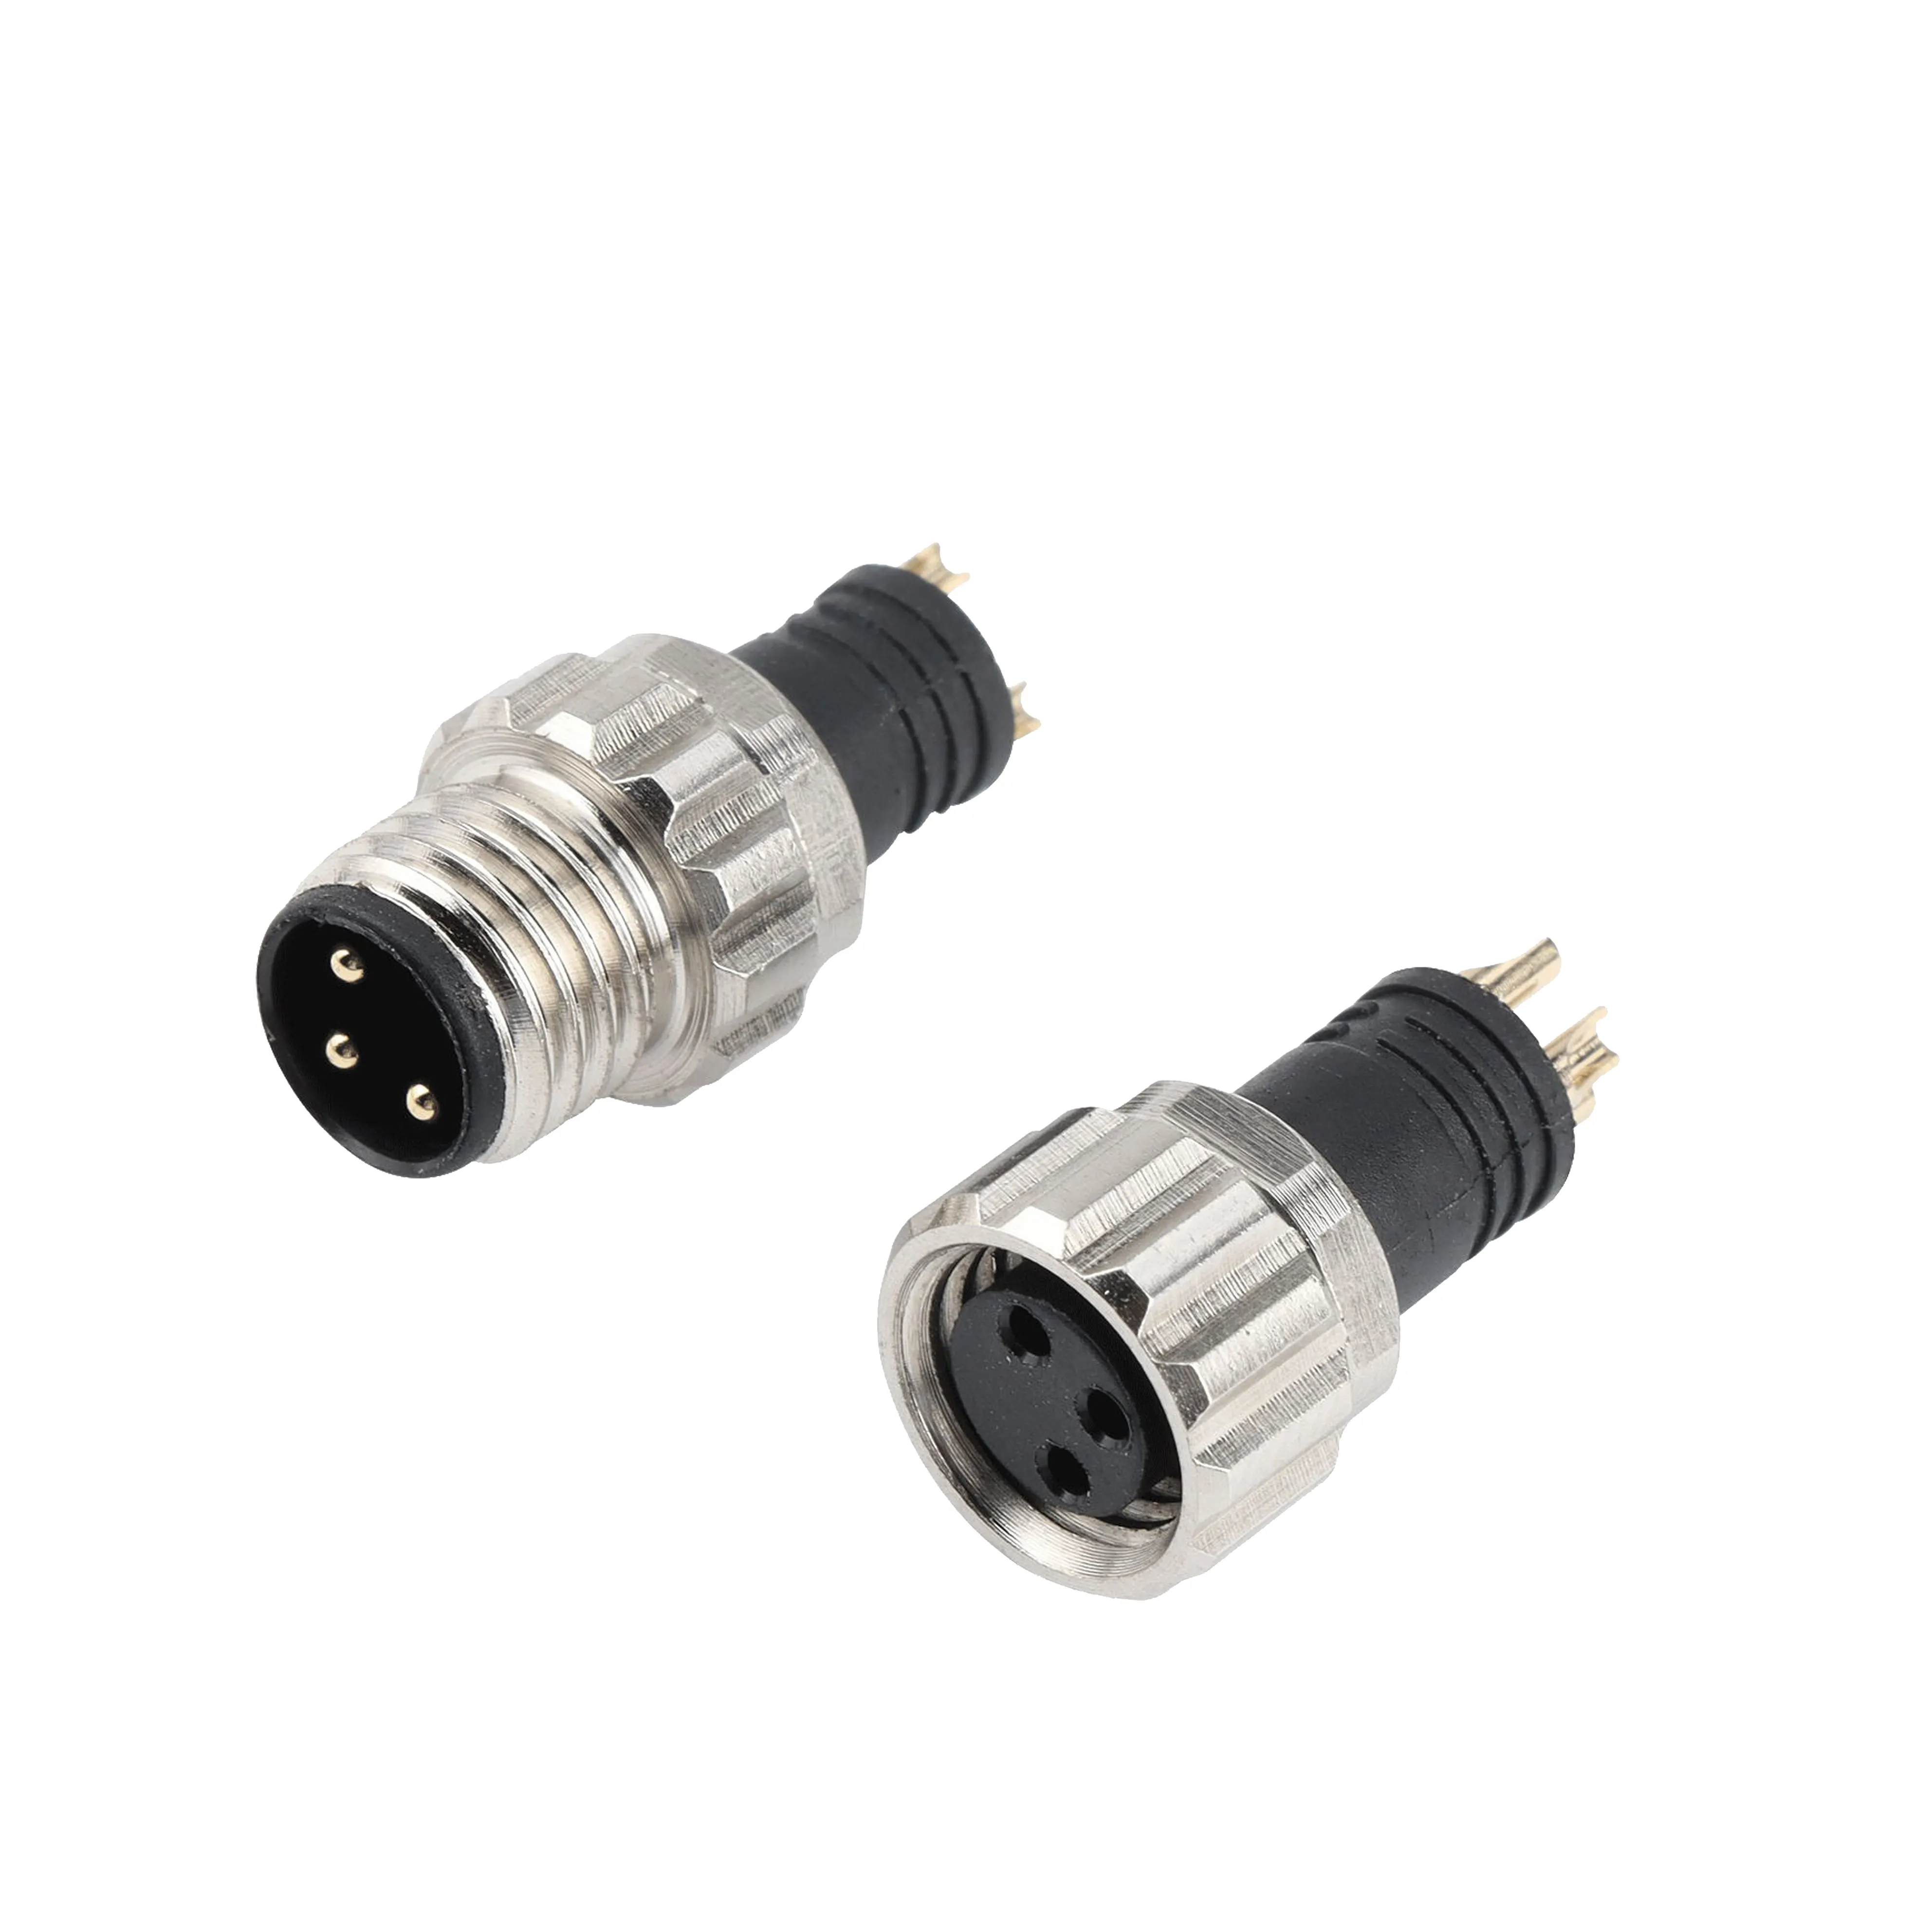 M8-3 core A type male/female bare head waterproof signal transmission connector male/female matching aviation plug